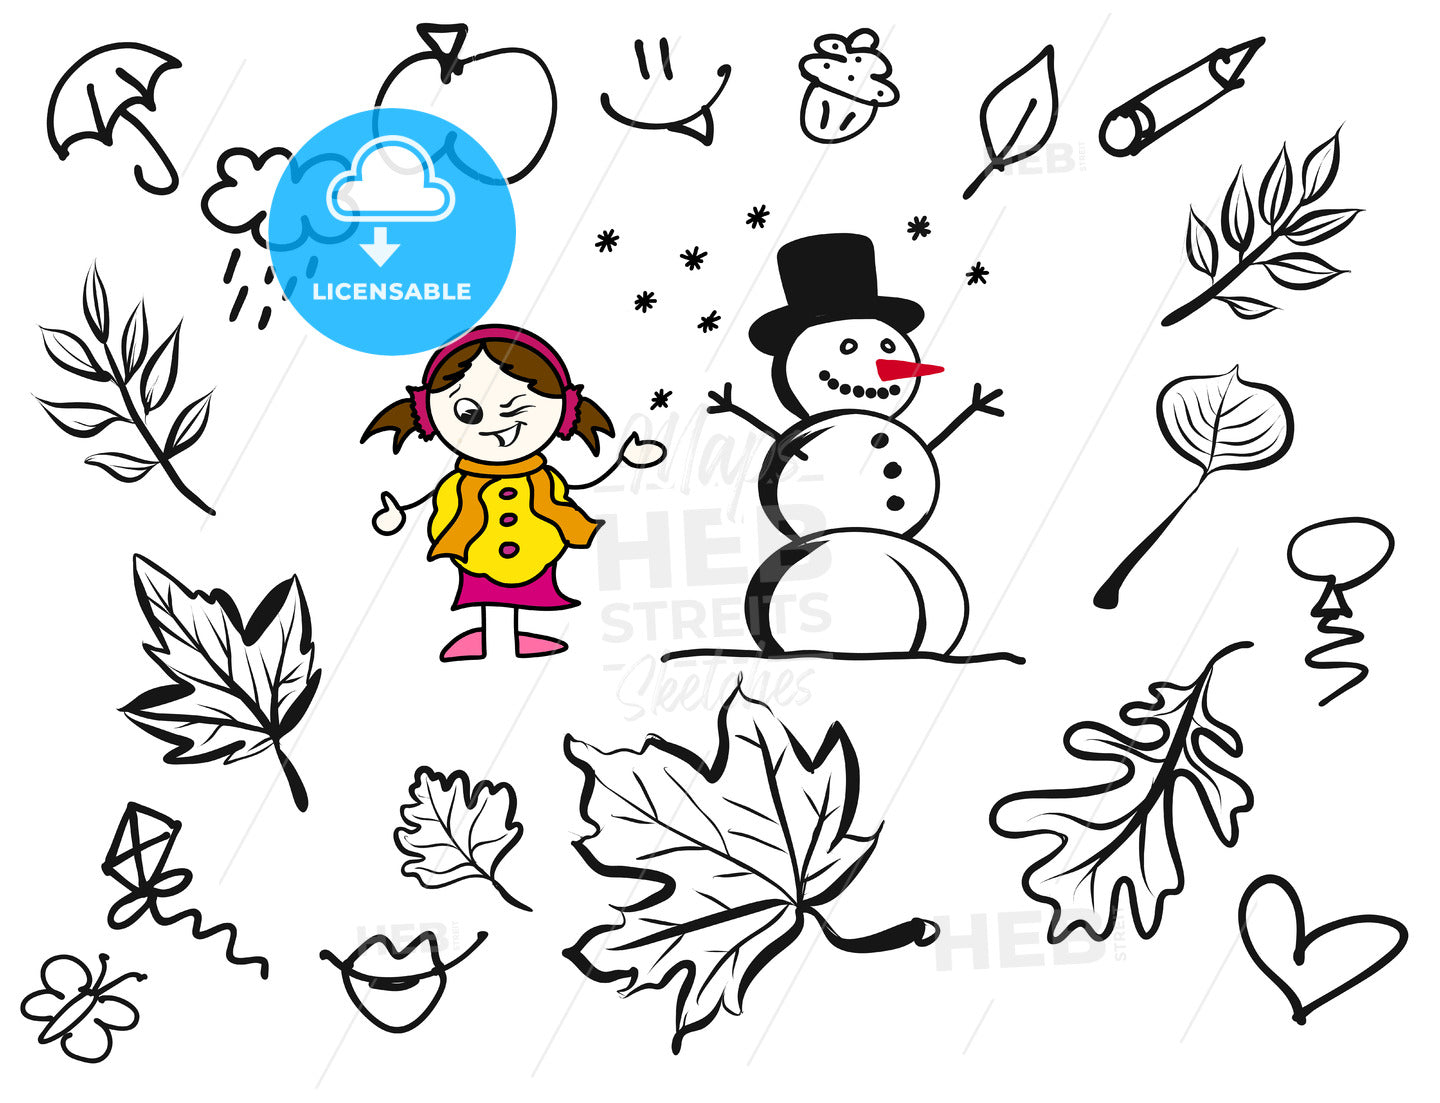 Little Comic Girl and Snowman with various sketched Leaves – instant download